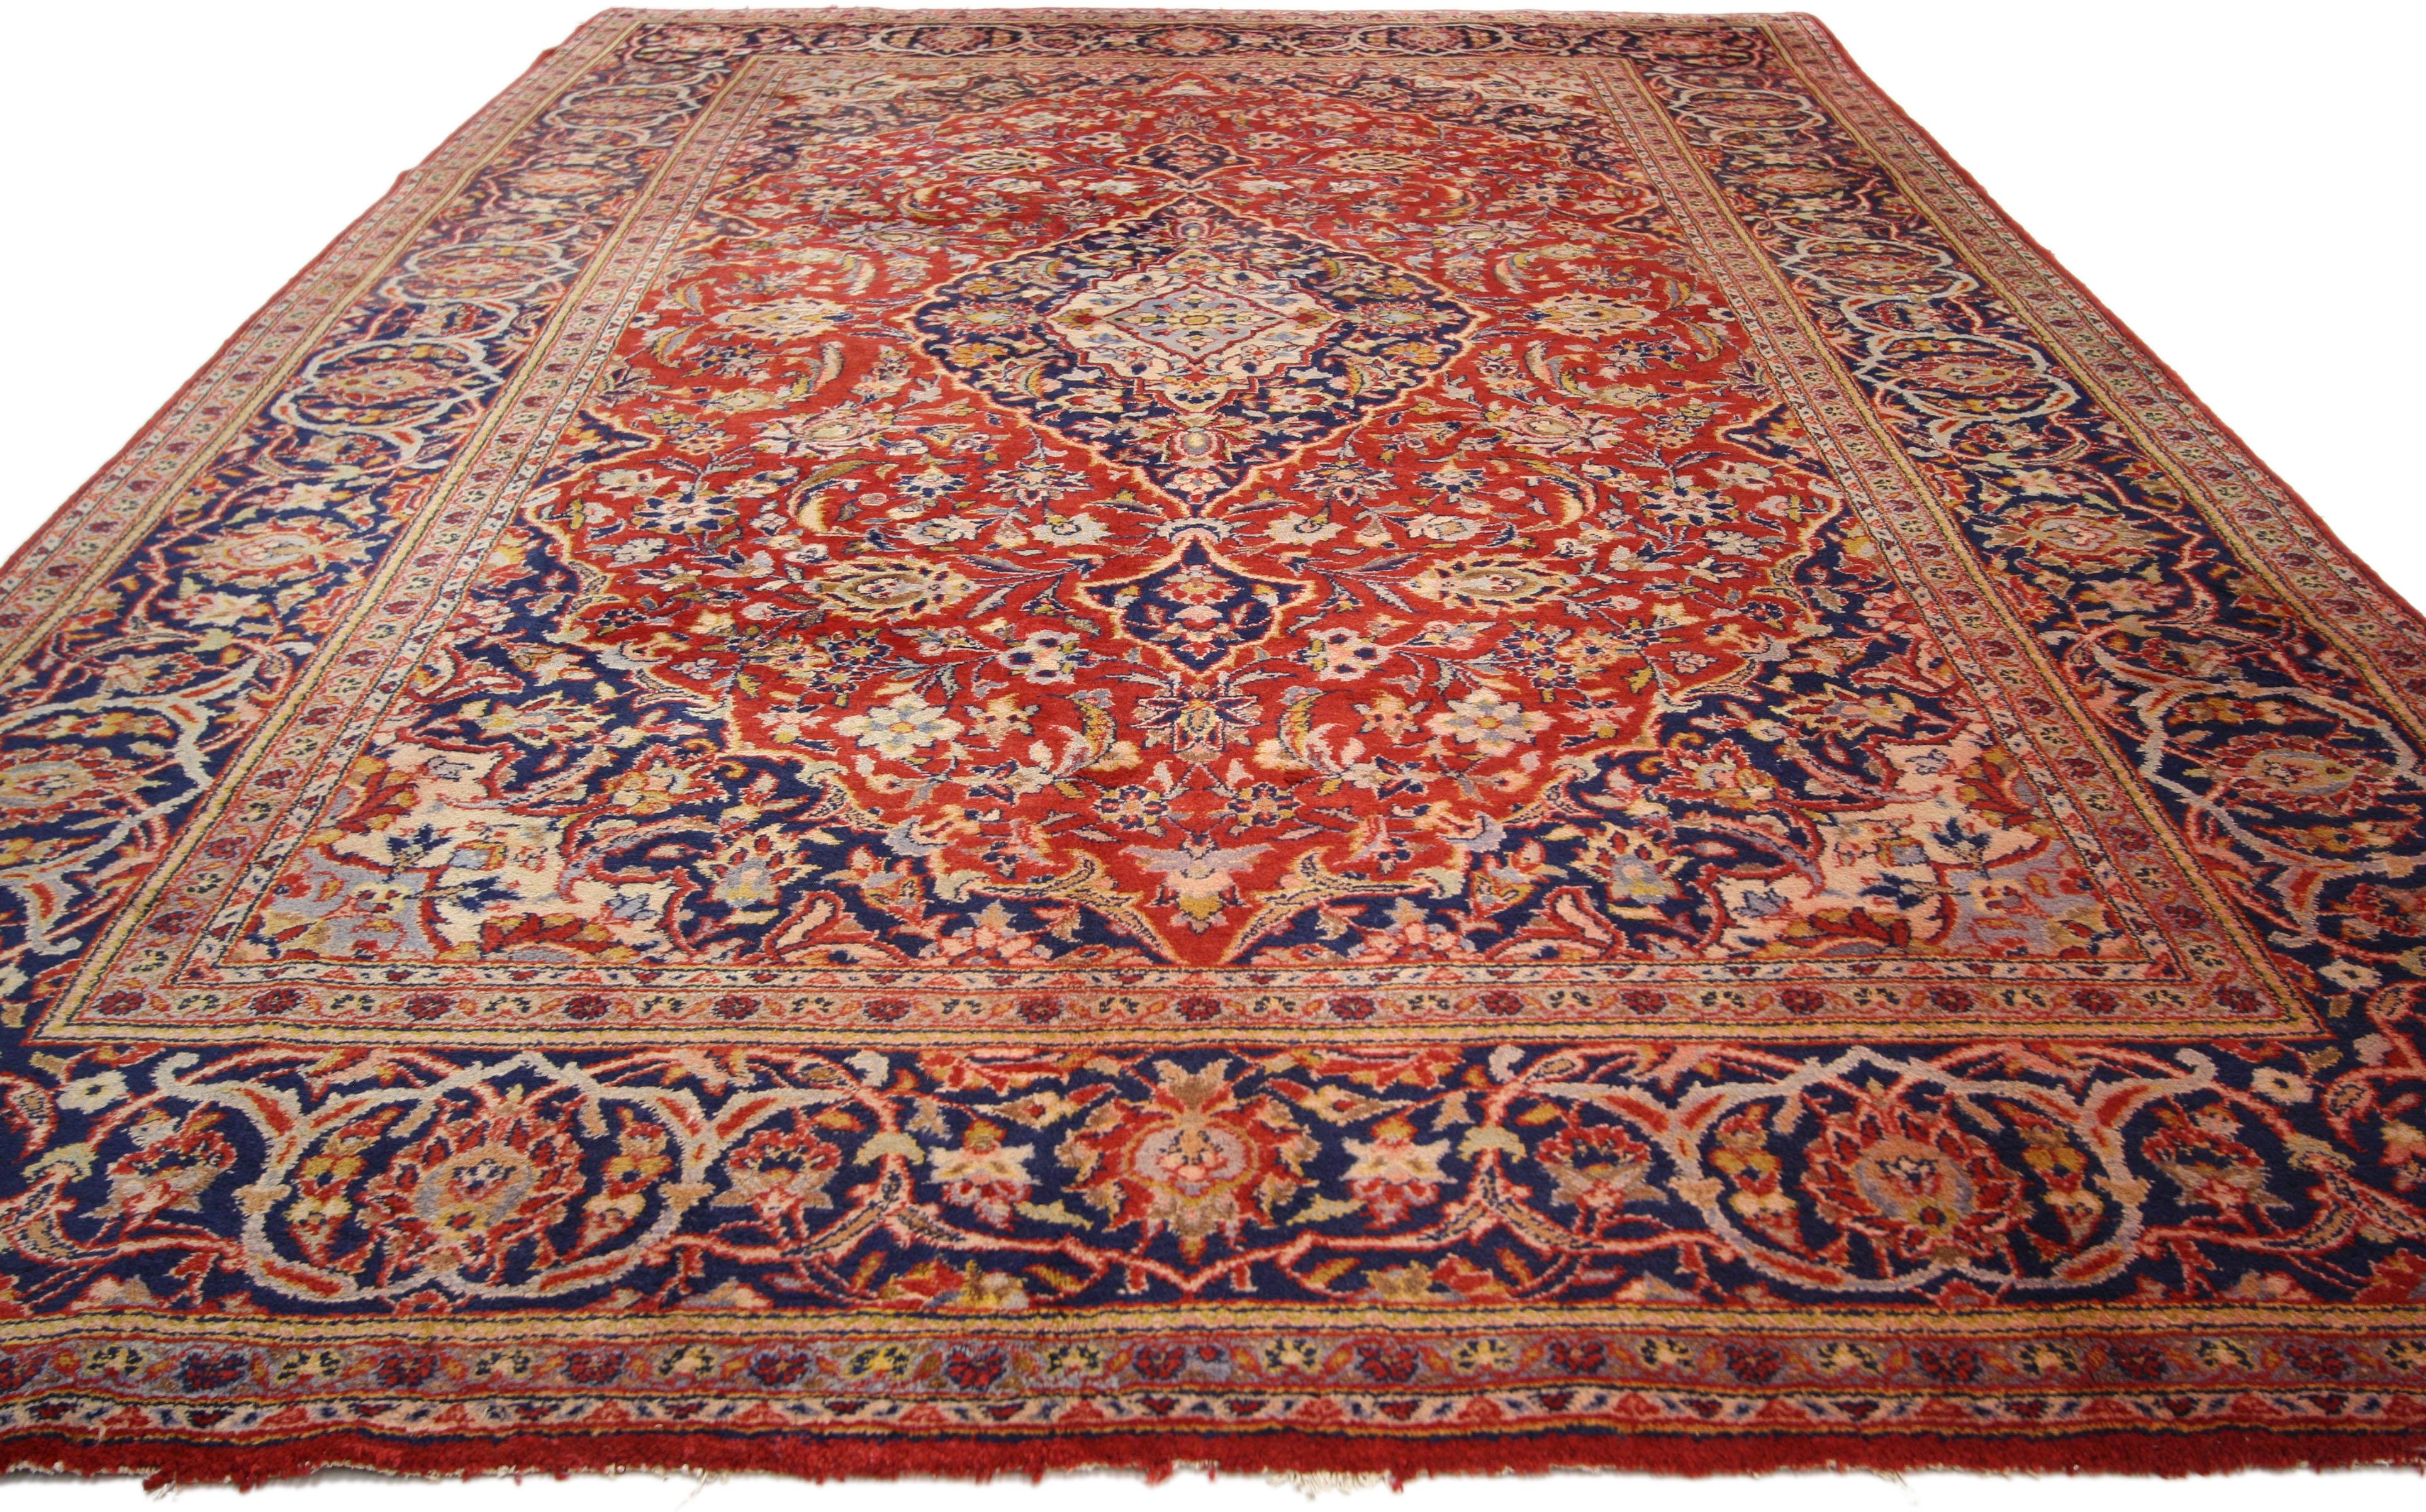 Vintage Persian Kashan Rug with Traditional Colonial and Federal Style In Good Condition For Sale In Dallas, TX